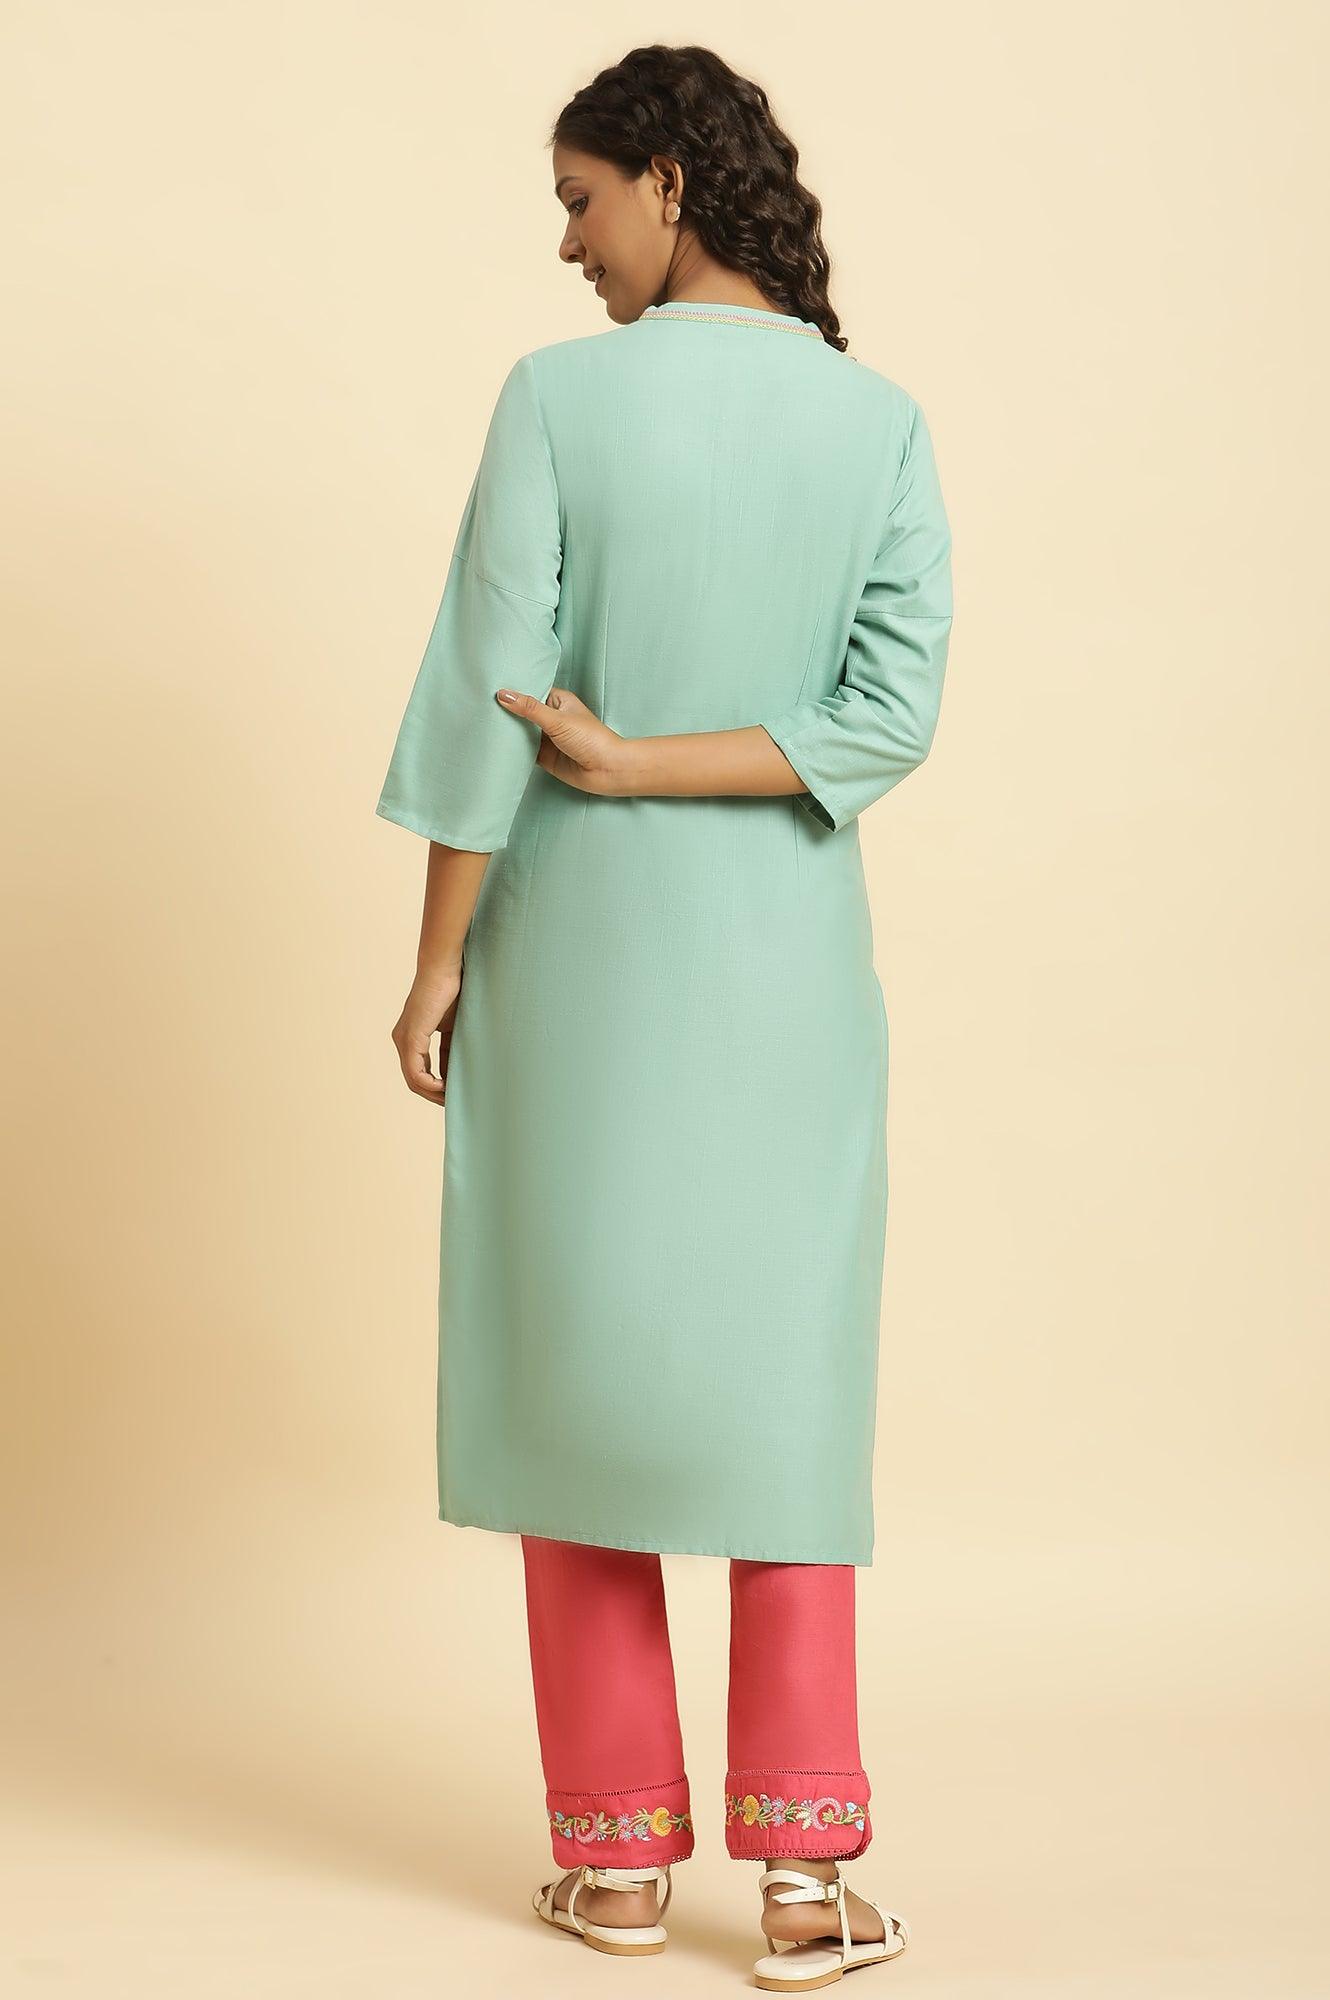 Mint Blue Solid Kurta With Embroidery On Shoulder - wforwoman